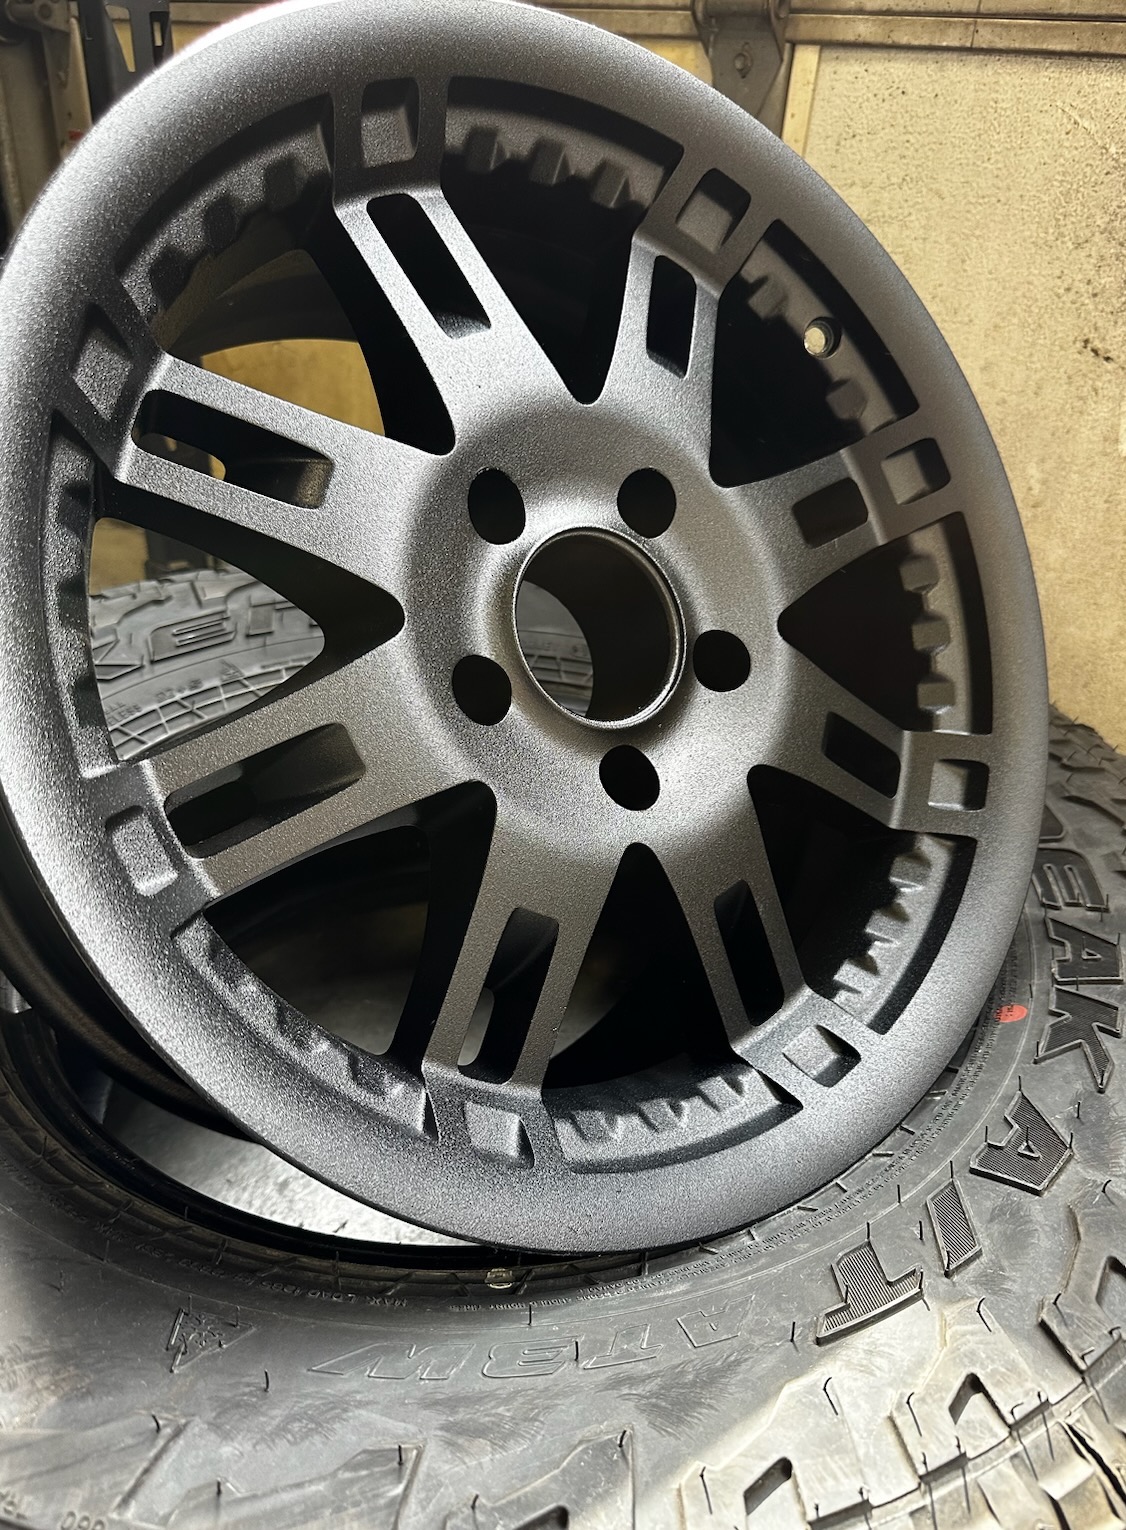 Clear matte wheels finished in Omaha, NE by Autographix using Powder Coating